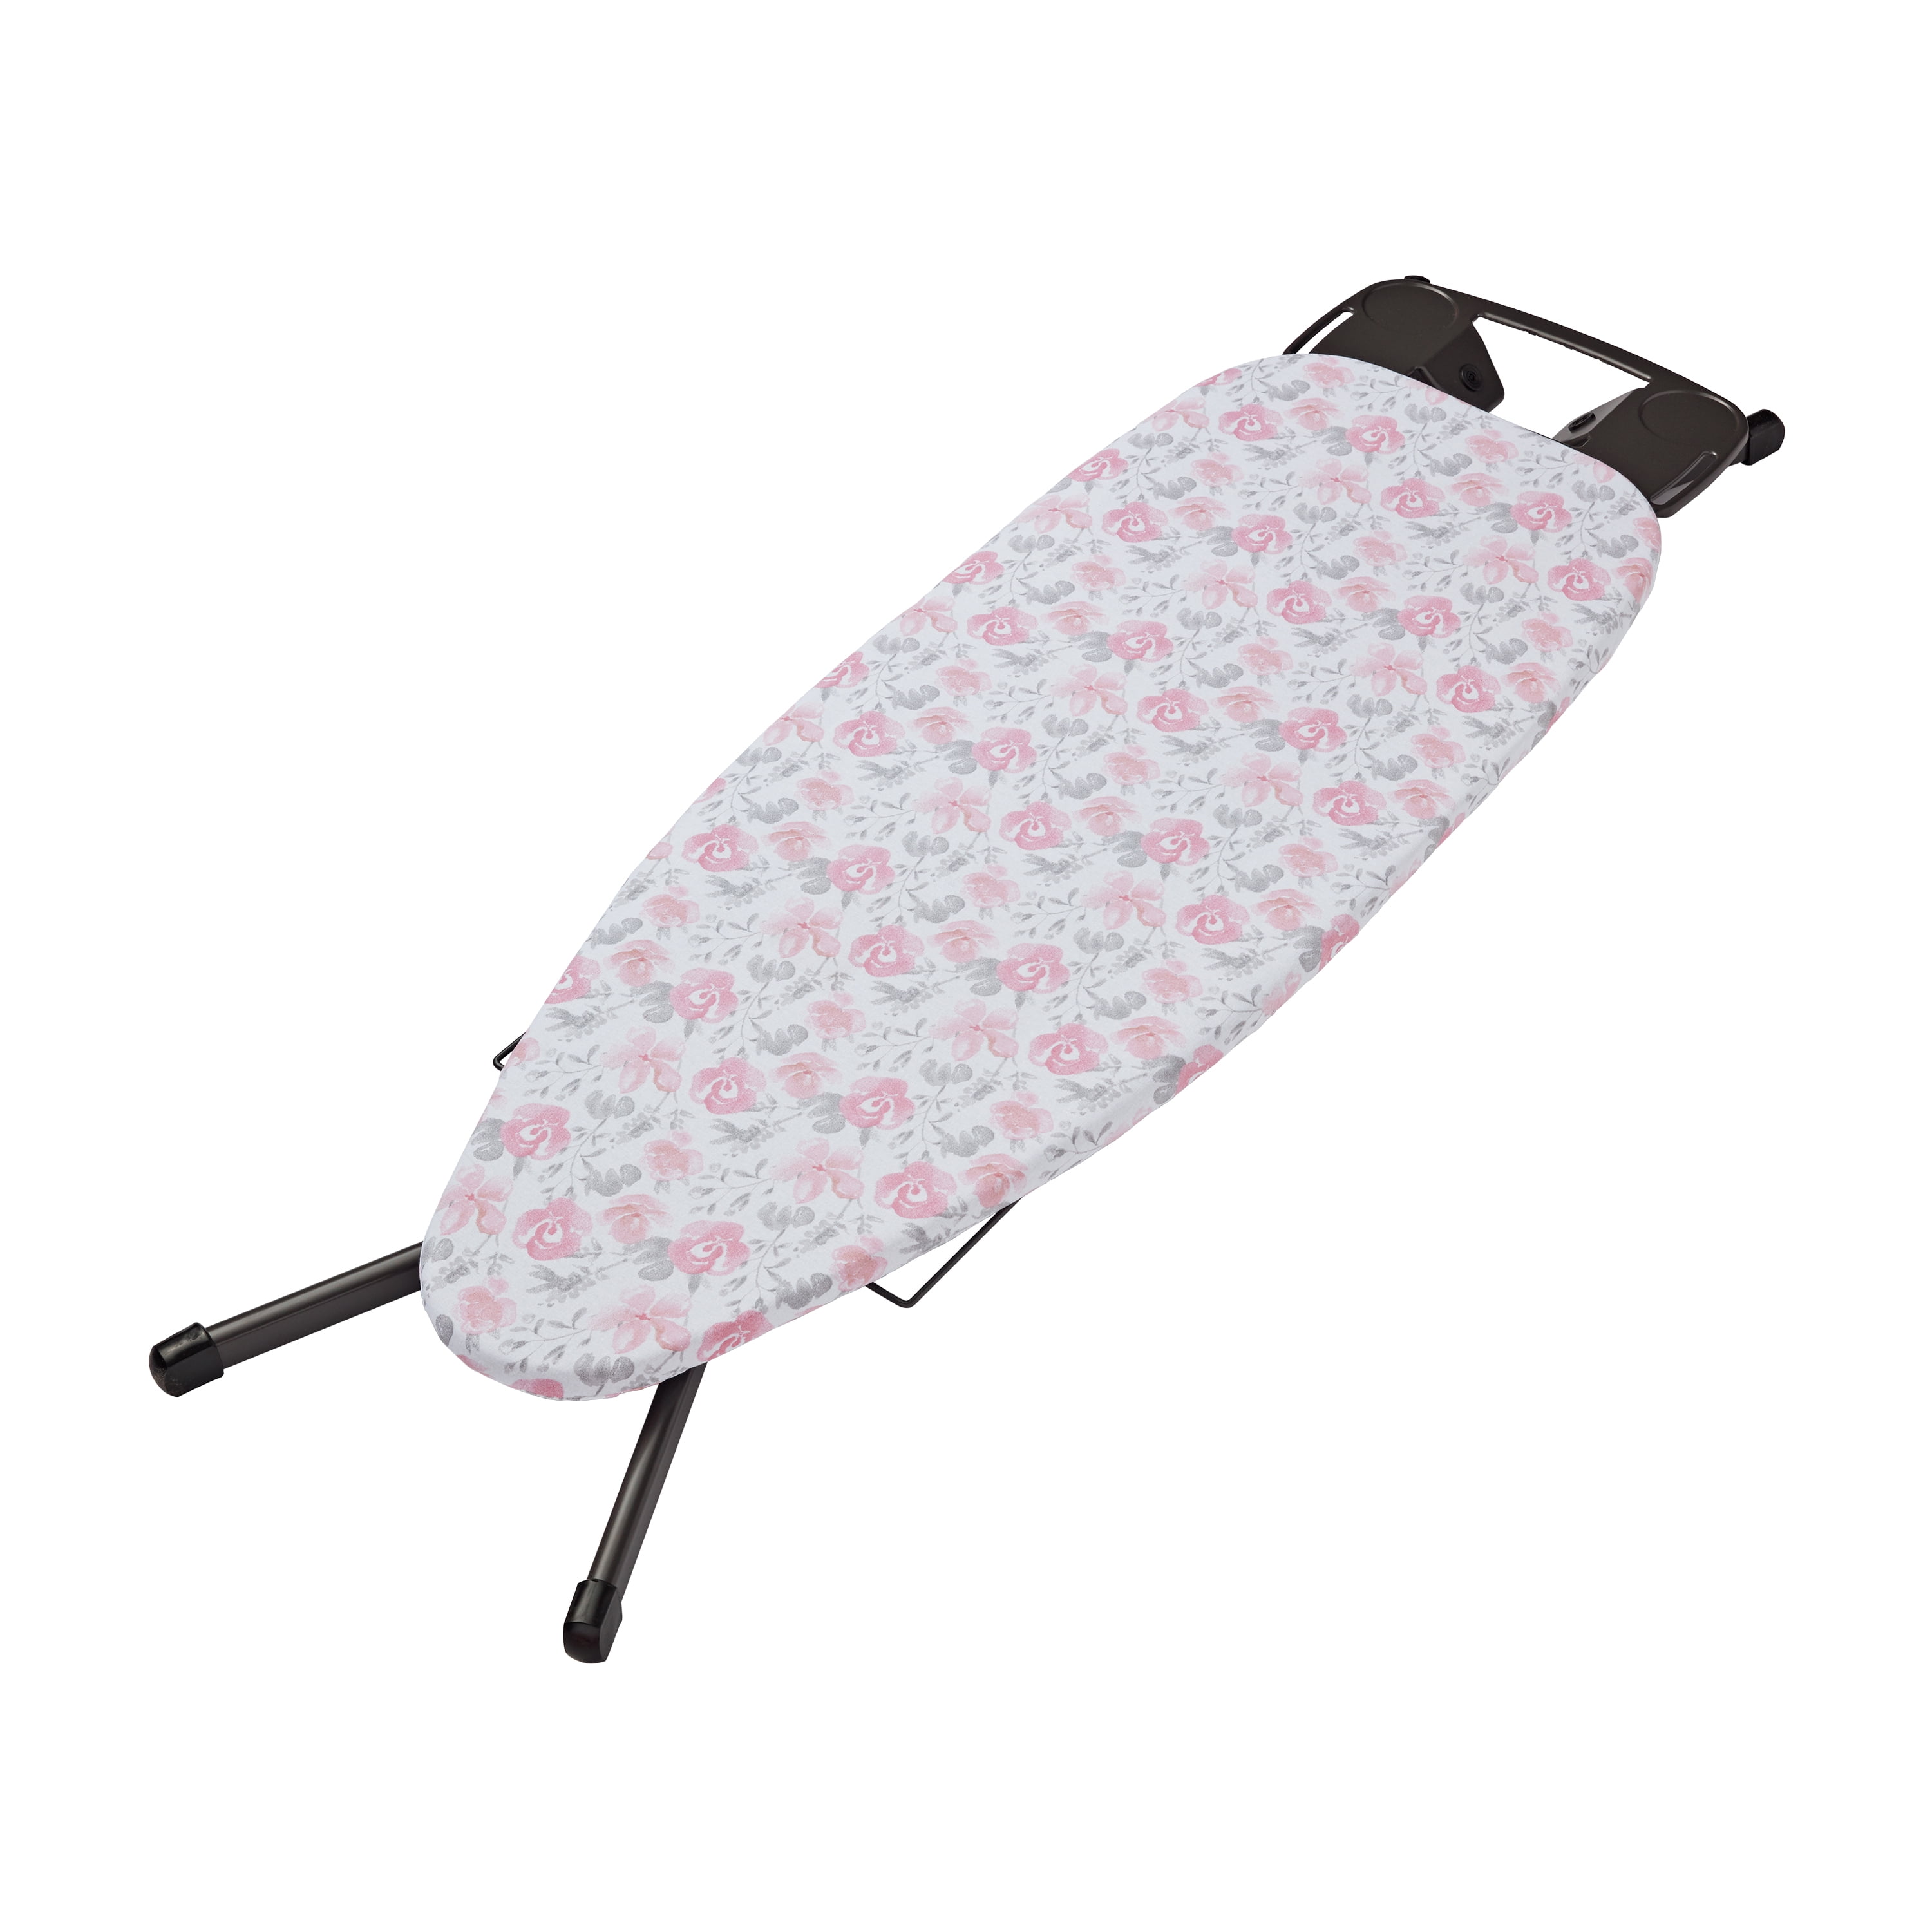 125 x 45 cm Minky Smartfit Reversible Ironing Board Cover Yellow/Grey 